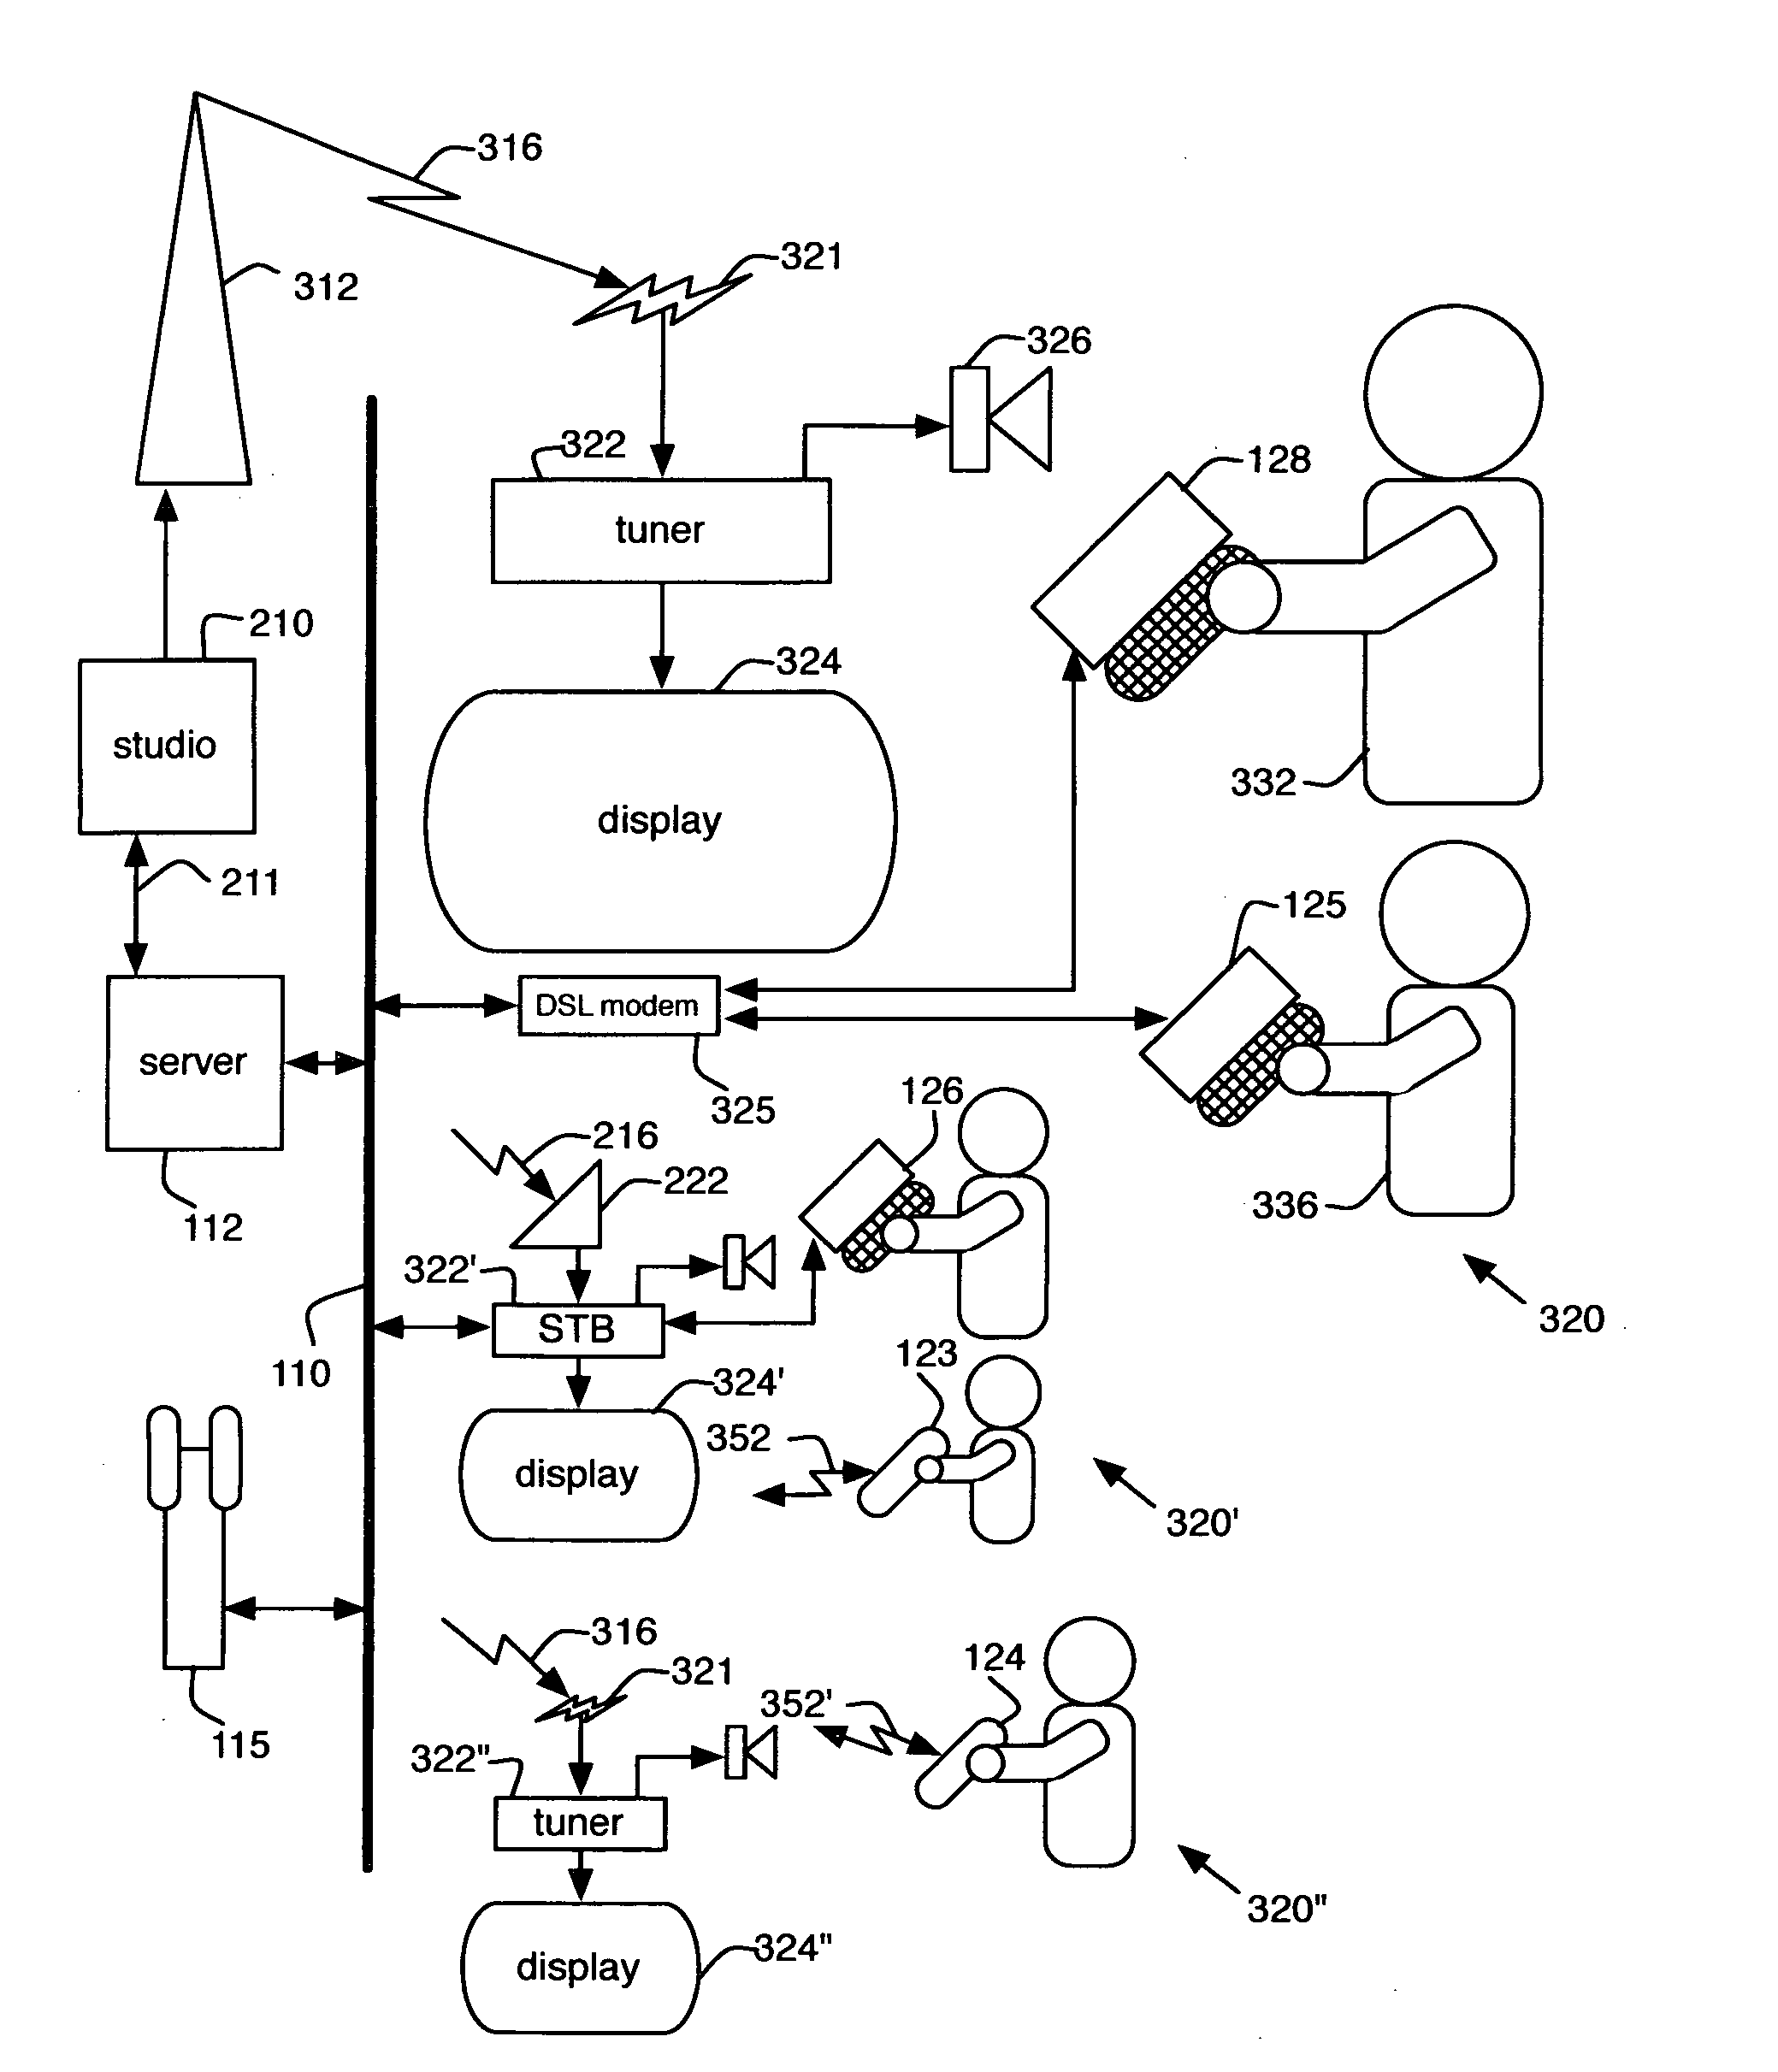 Method and apparatus for processing responses from a remote, live audience